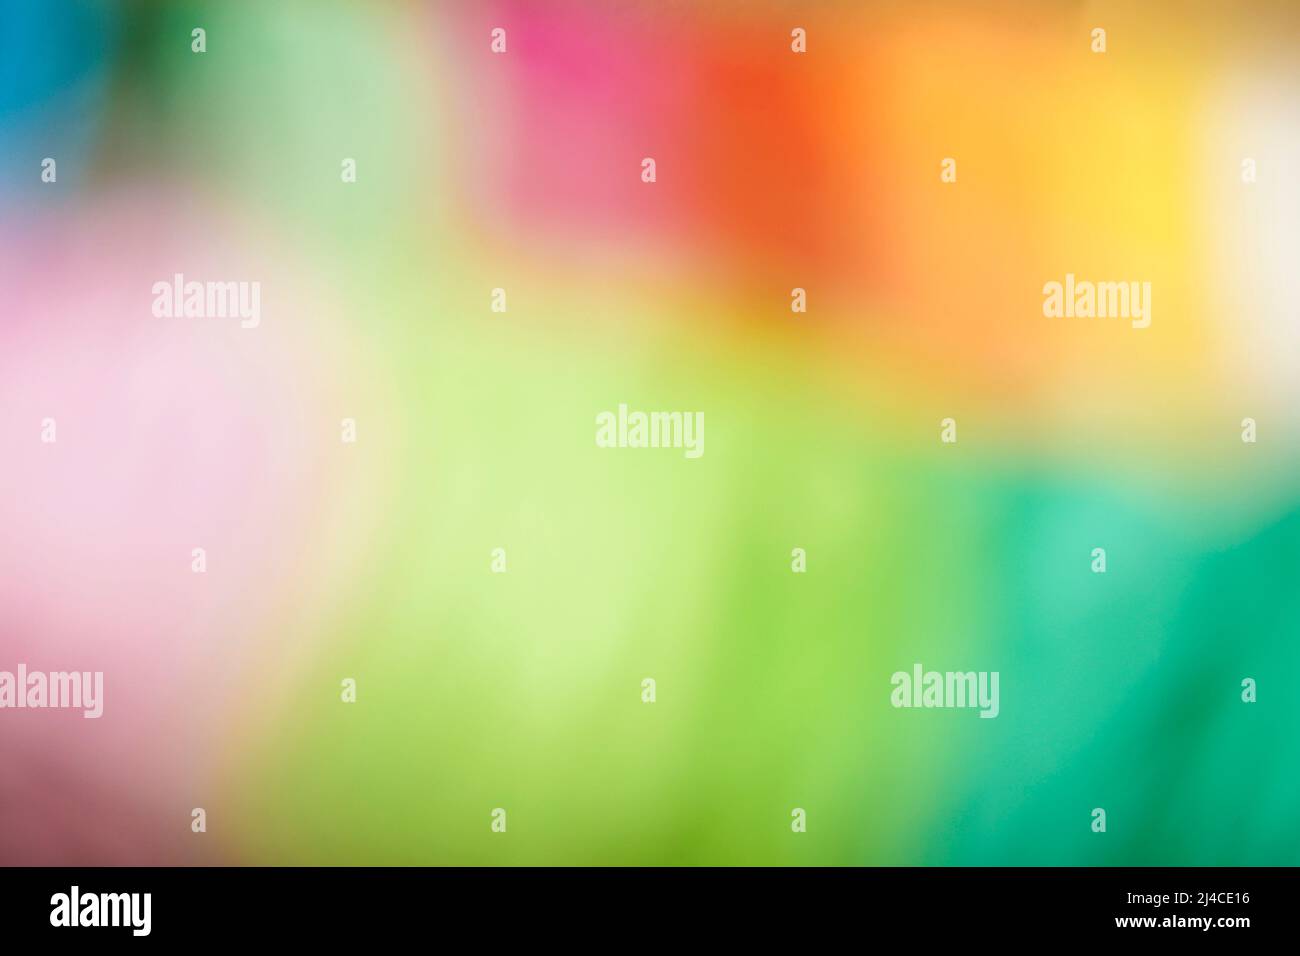 Colorful rainbow and abstract background with vibrant colors Stock Photo